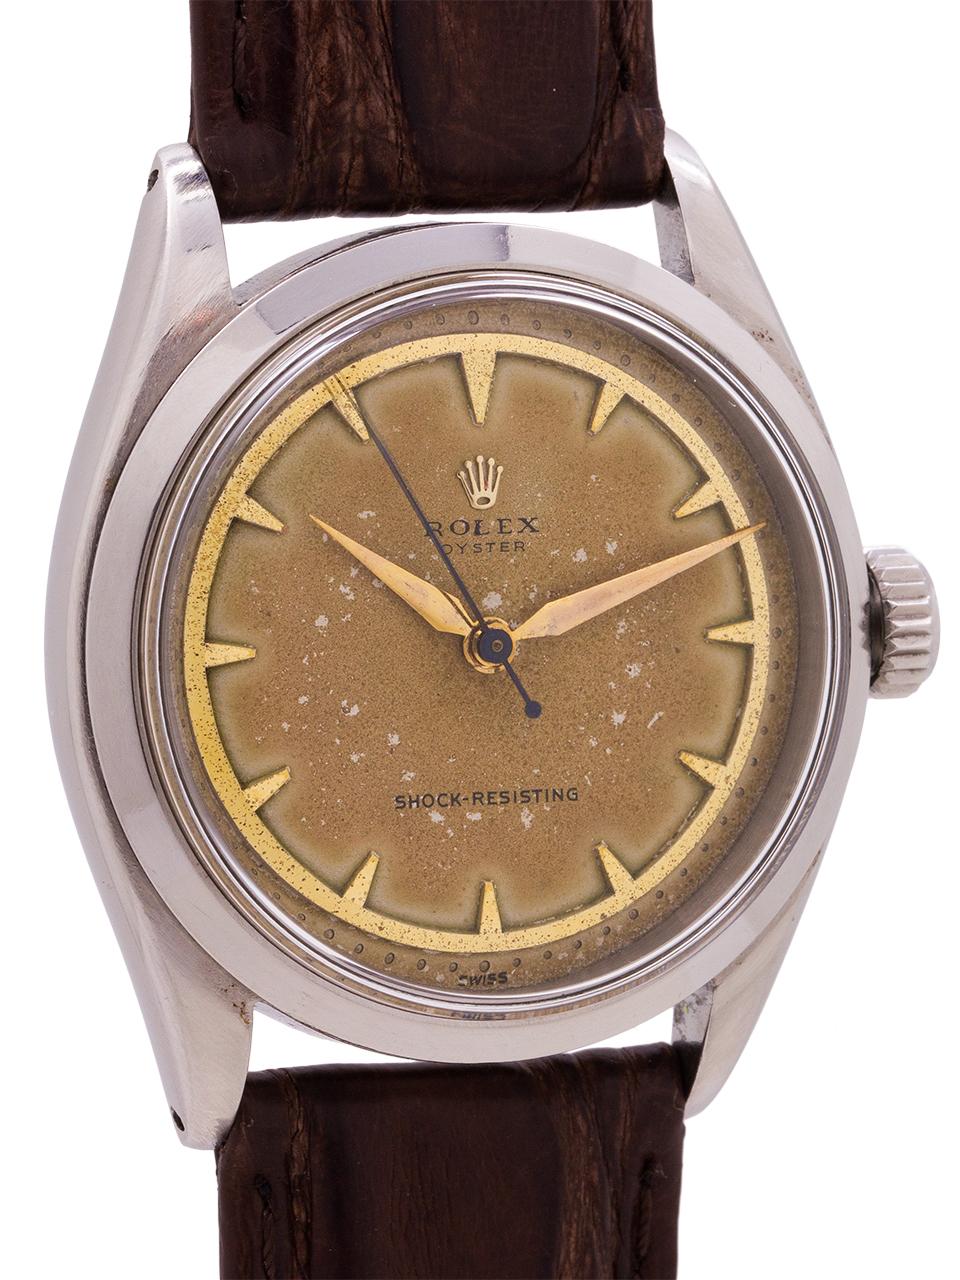   
Rolex Oyster reference# 6480, serial# 94,xxx circa 1955. Featuring a 34mm diameter case with smooth bezel and acrylic crystal. Unbelievably rare dial configuration, with heavy patina. On this Oyster the pointed hour markers all sit inside one